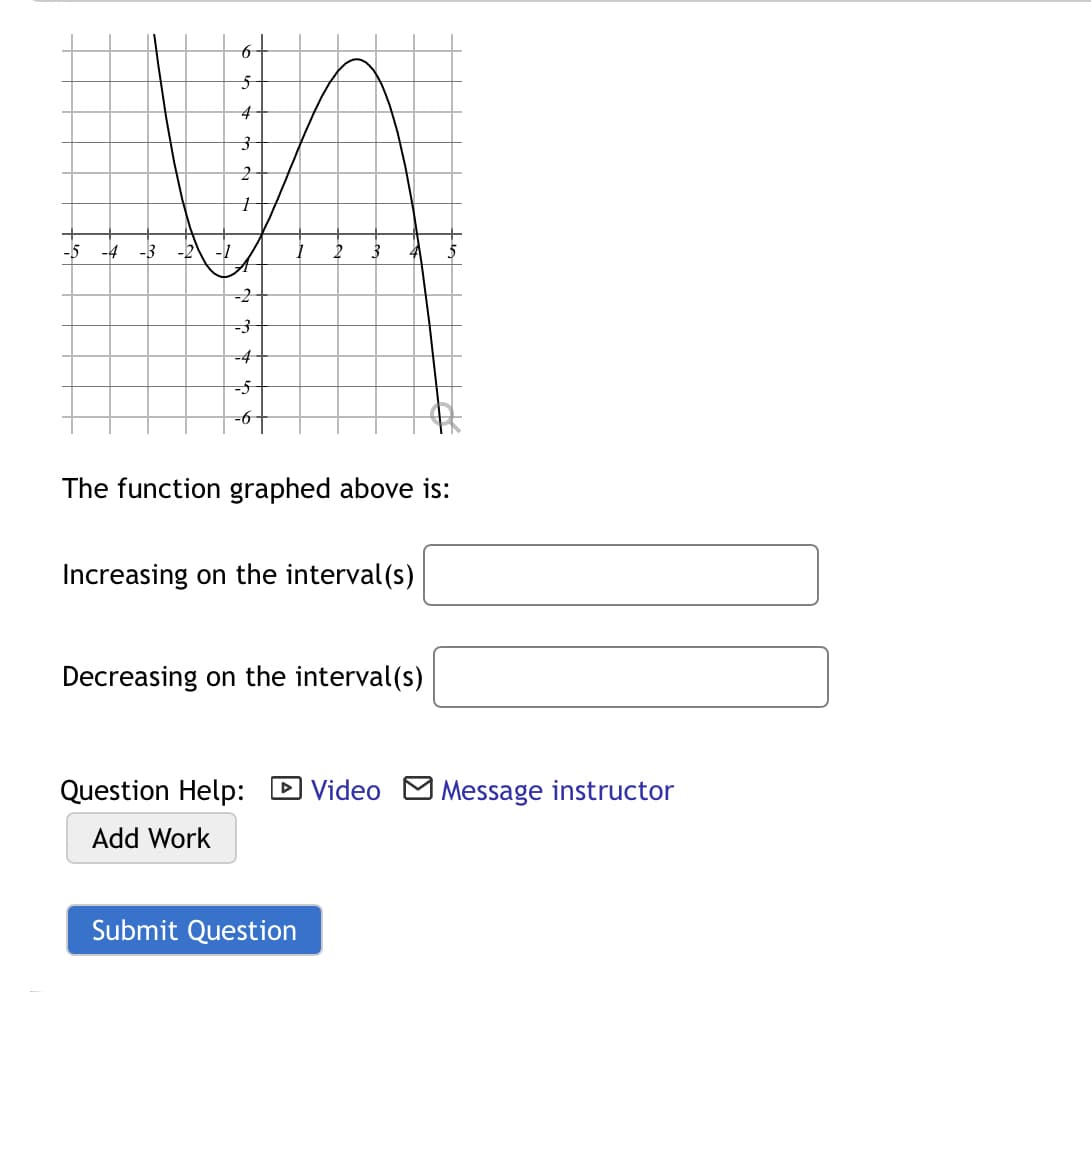 4
-4
-3
-2
-1
-2
-4
-5
-6
The function graphed above is:
Increasing on the interval (s)
Decreasing on the interval(s)
Question Help:
D Video
Message instructor
Add Work
Submit Question
